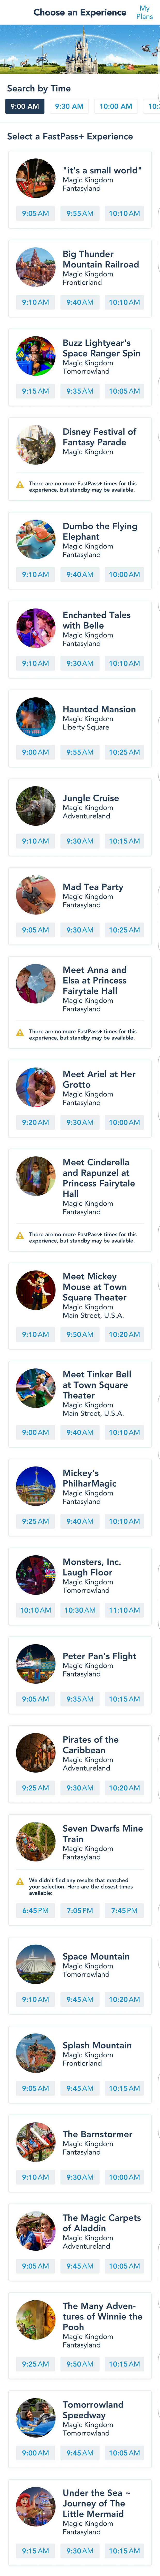 Changes to Disney World Fastpass+ System (5)